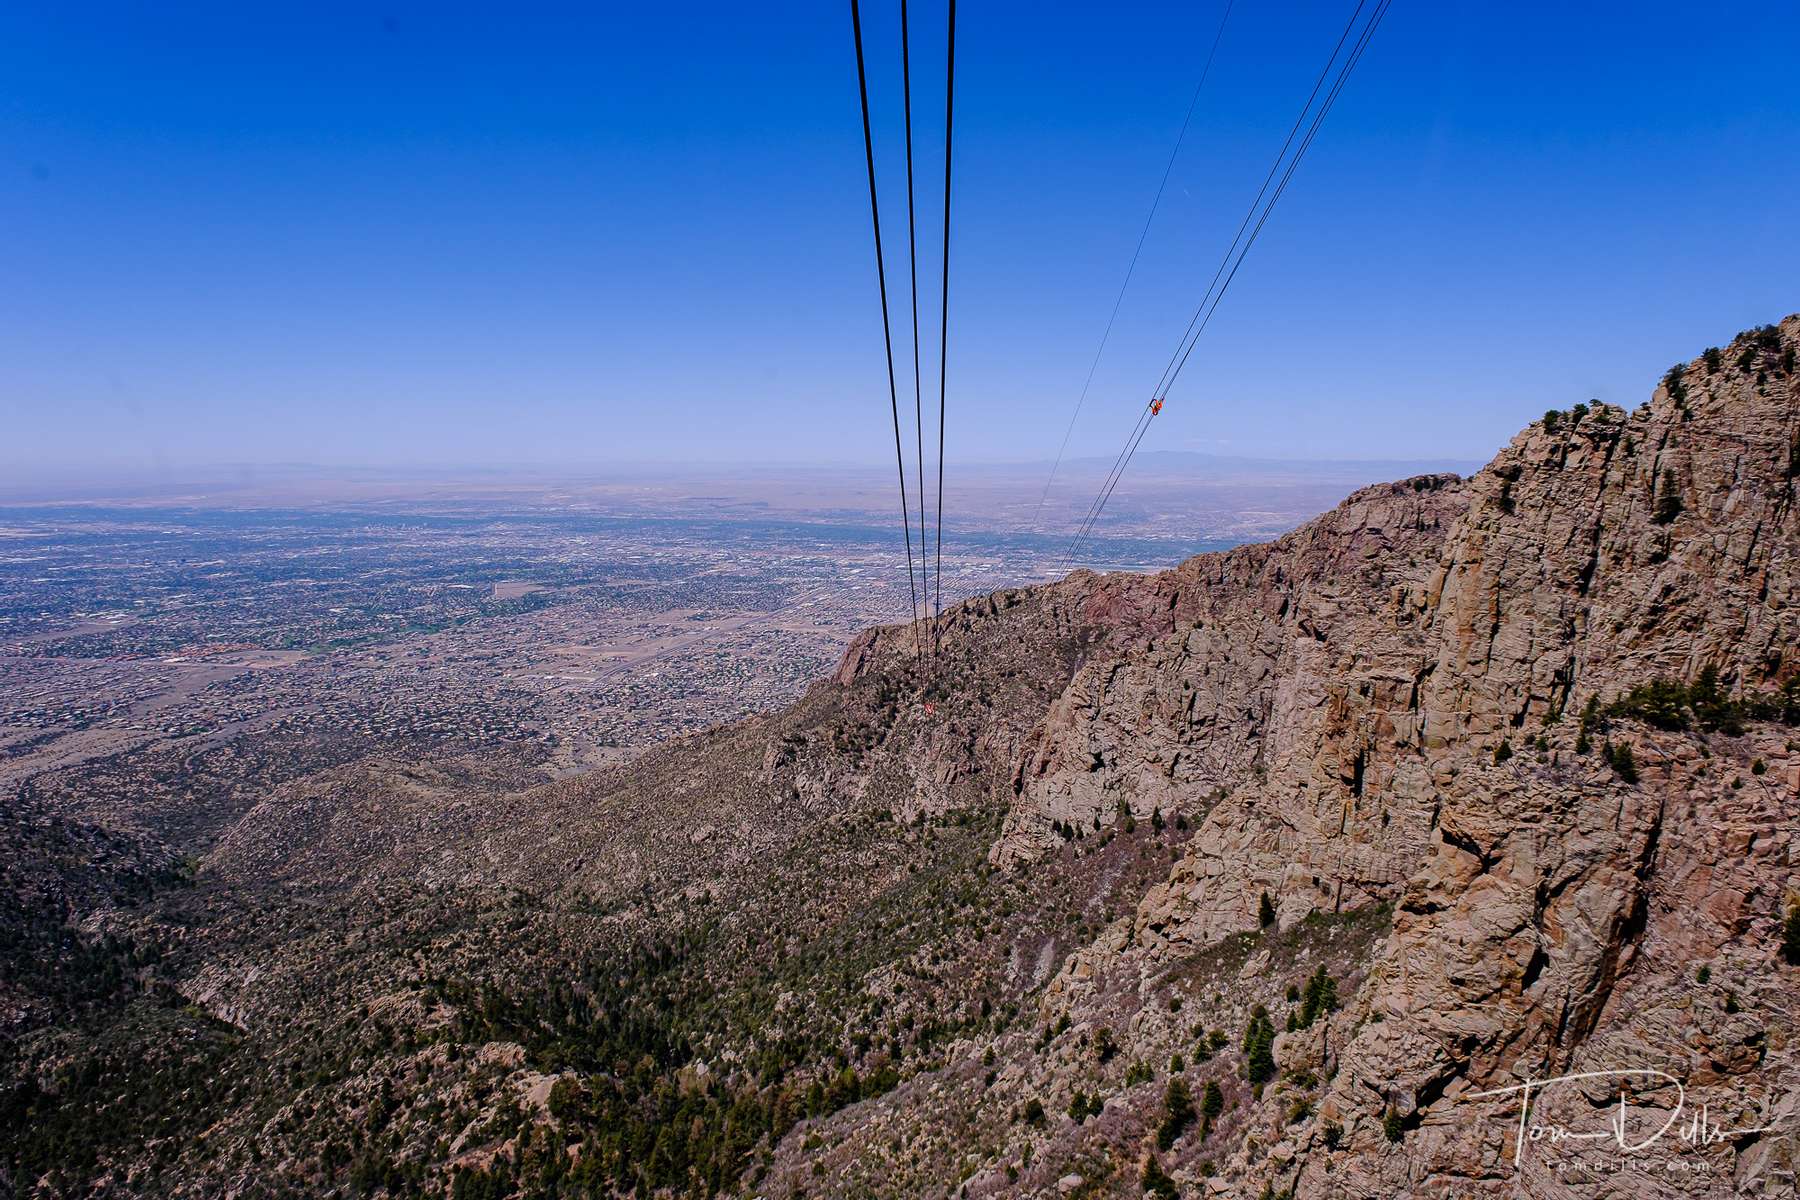 Riding the Sandia Peak Tramway to an elevation of 10,378 feet.